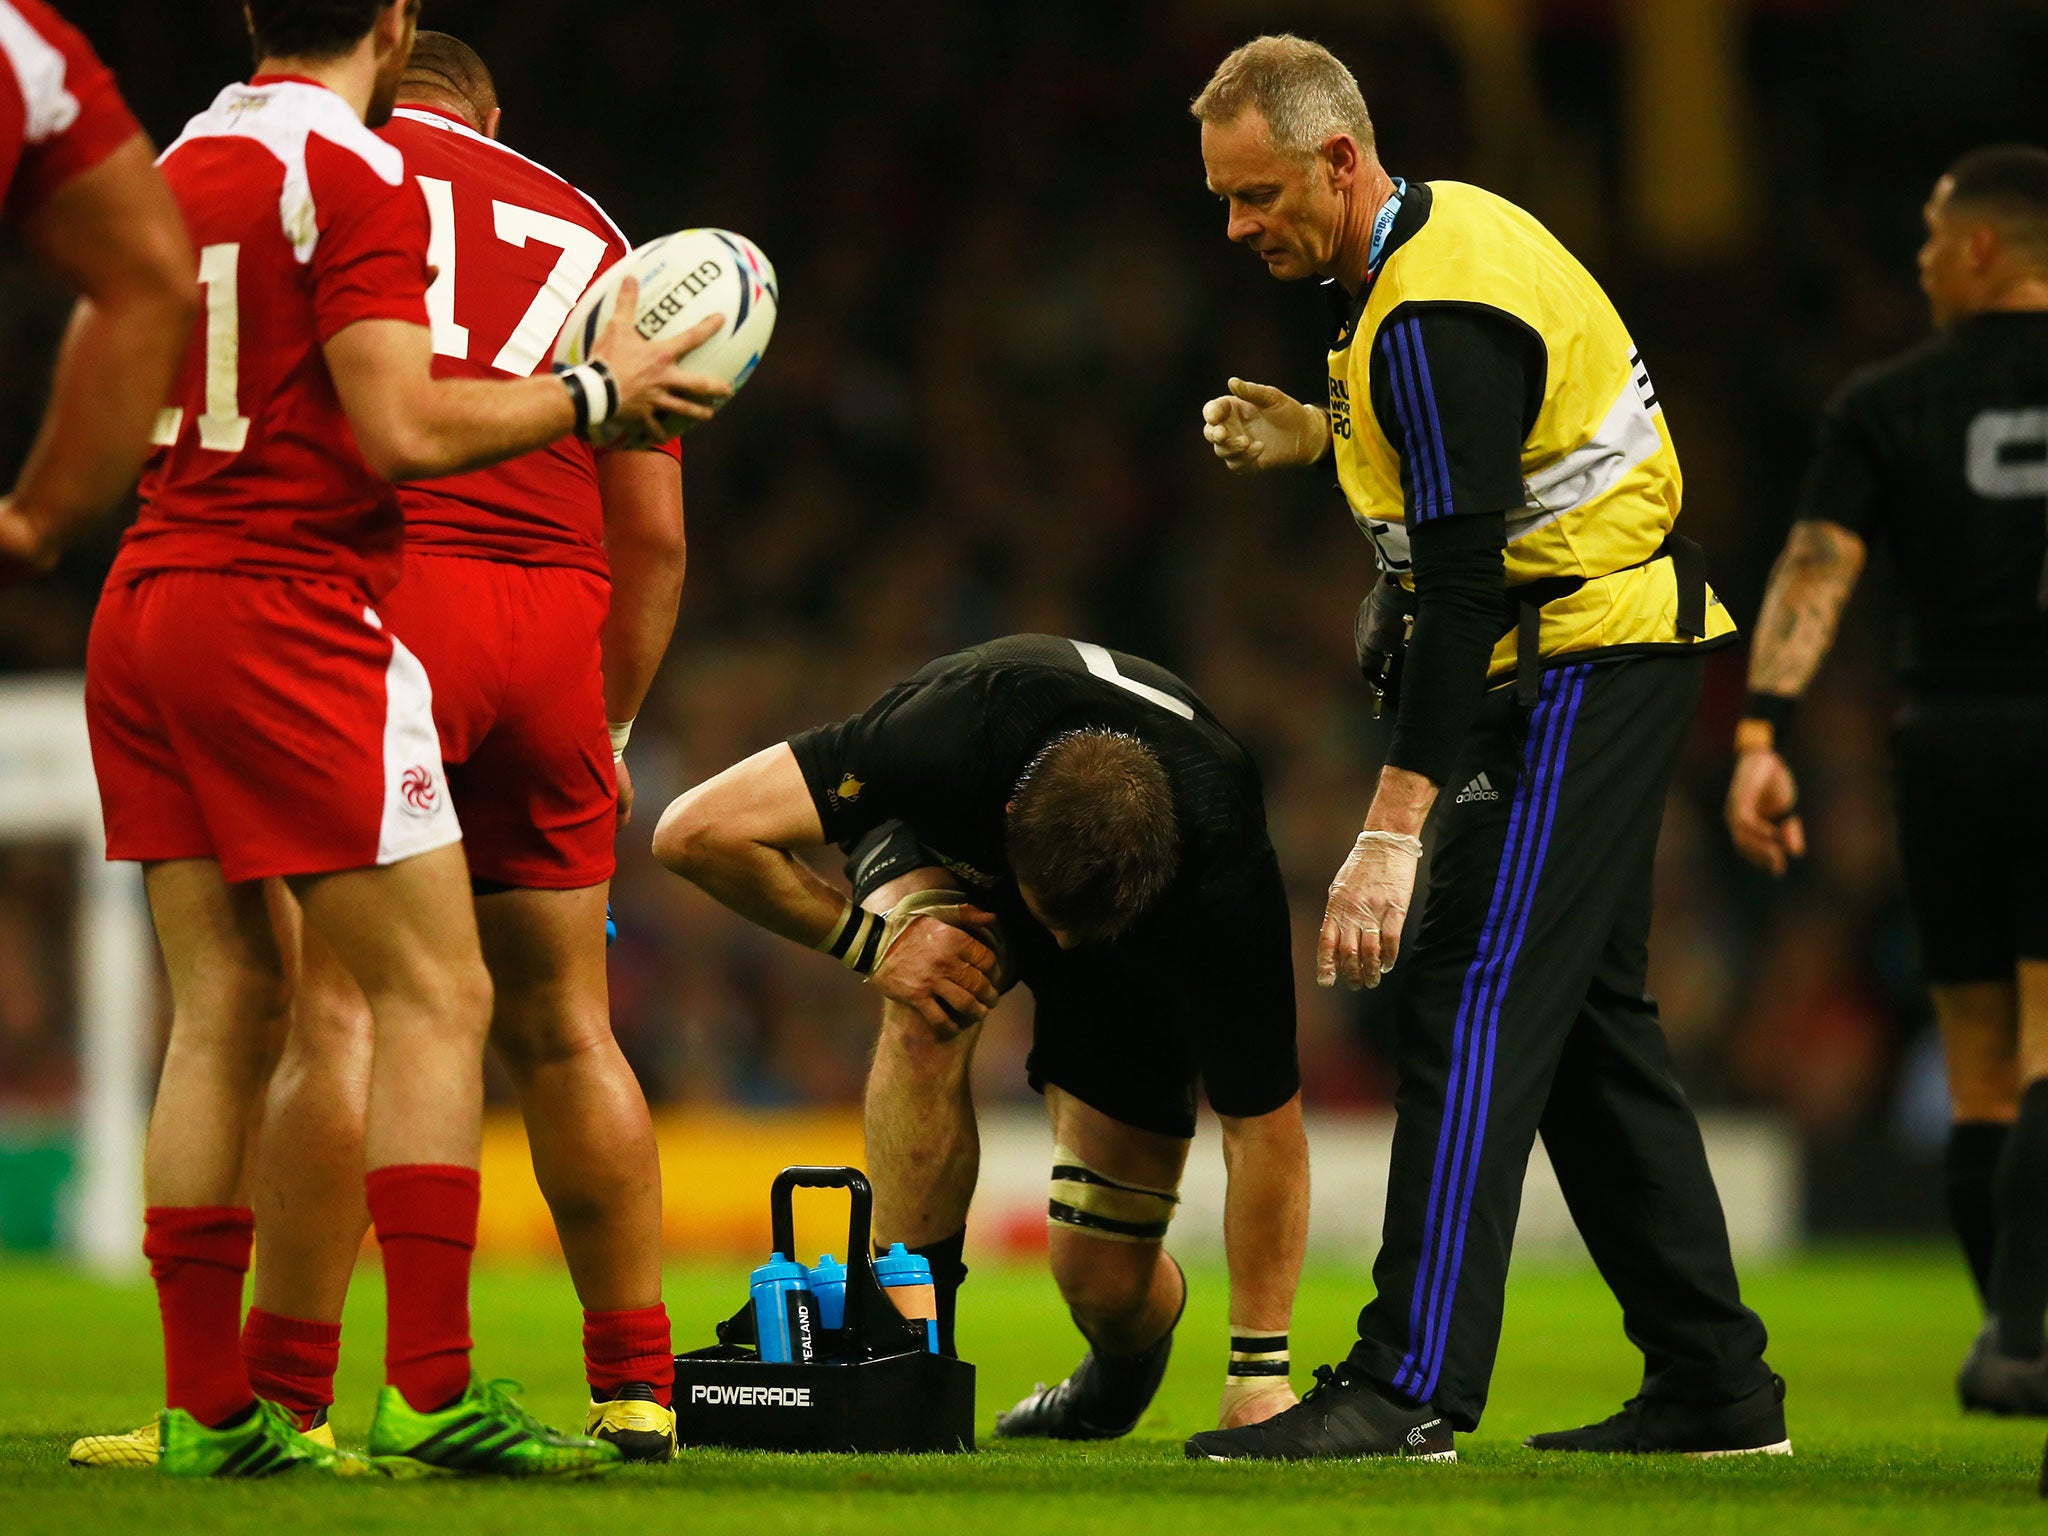 Richie McCaw receives treatment before limping off